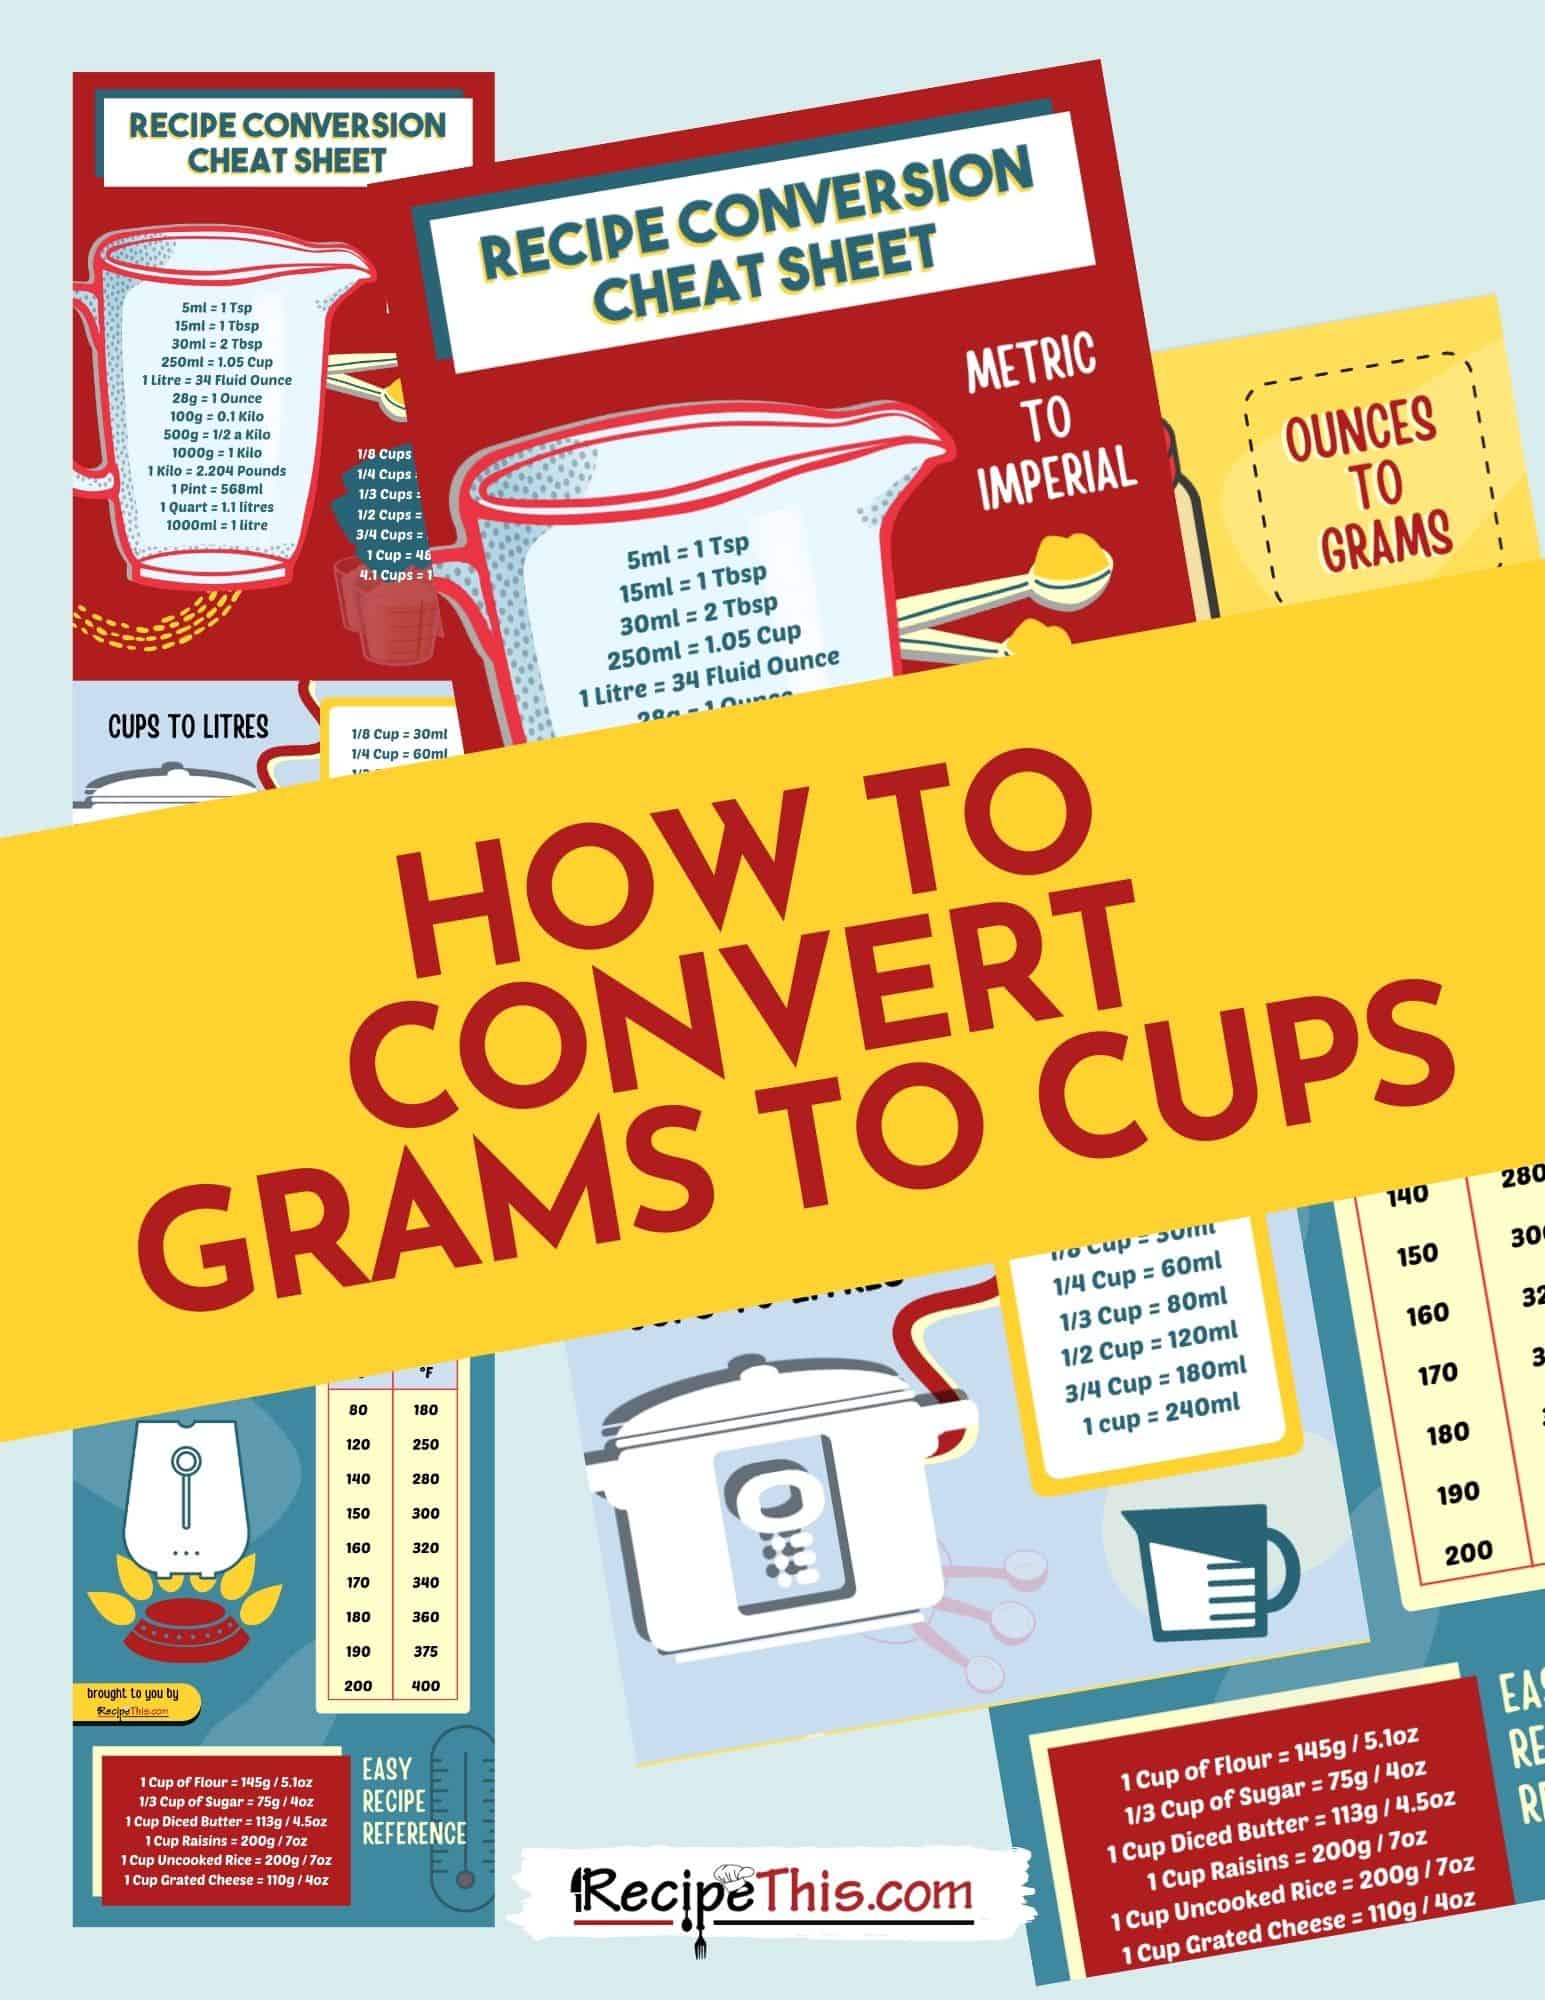 how to convert grams to cups.